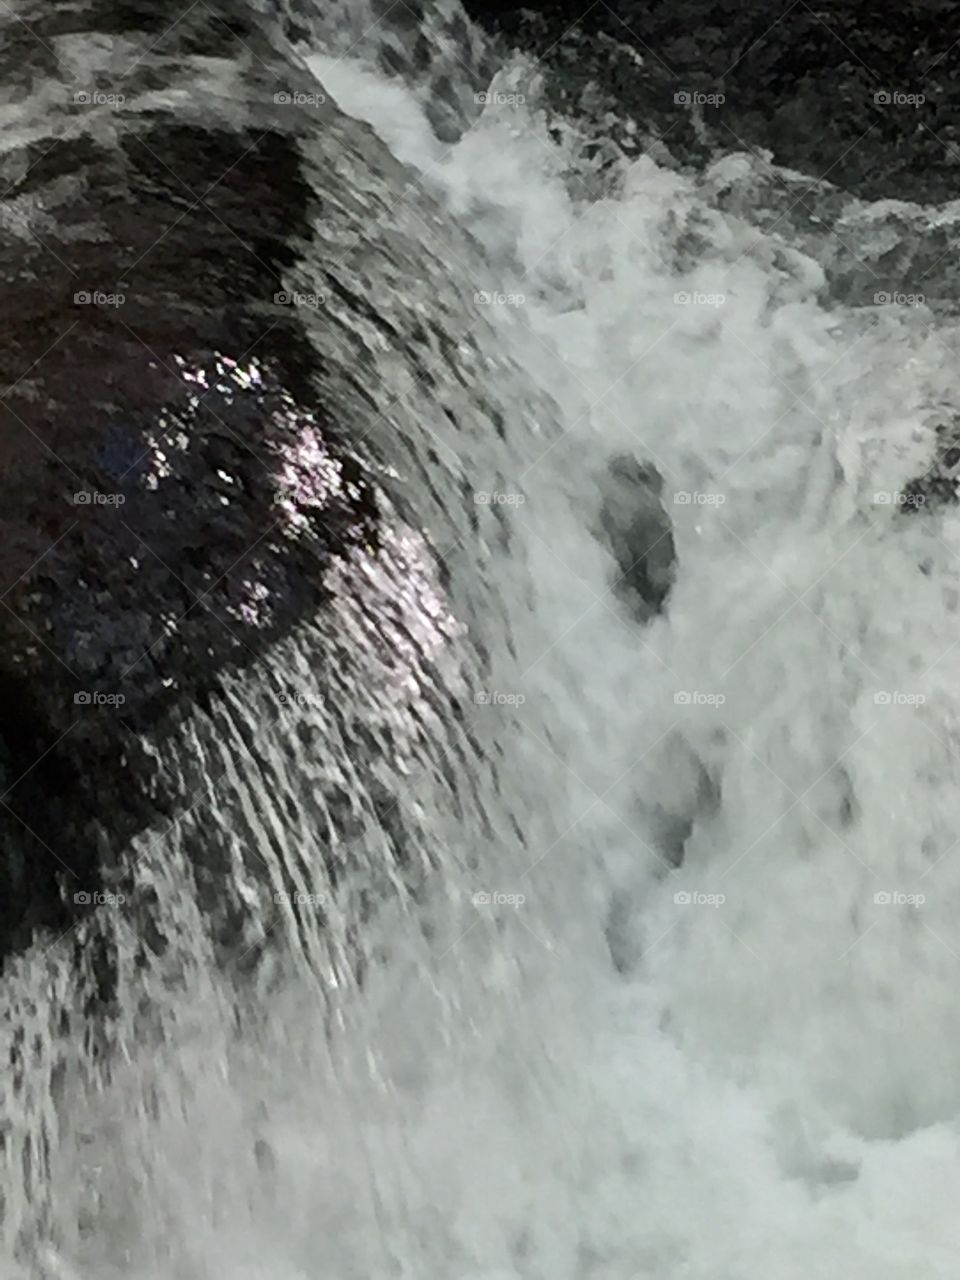 Cascading Water 